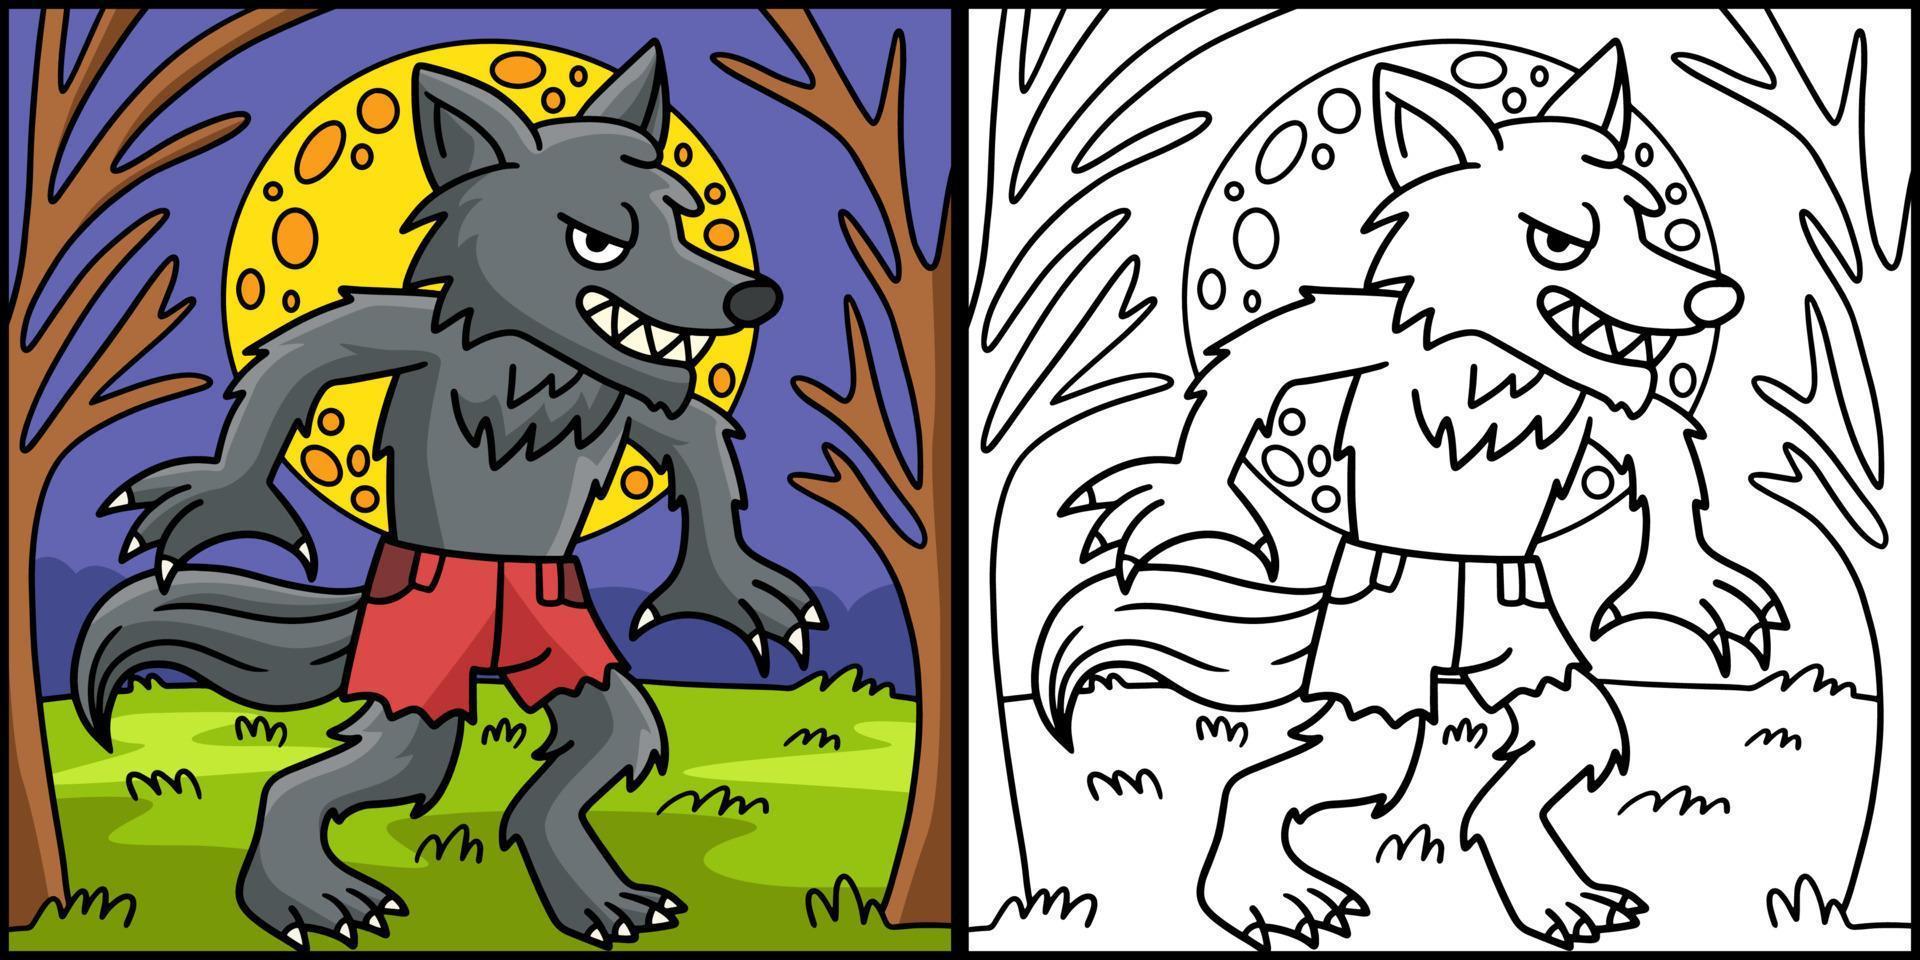 Werewolf Halloween Coloring Colored Illustration vector